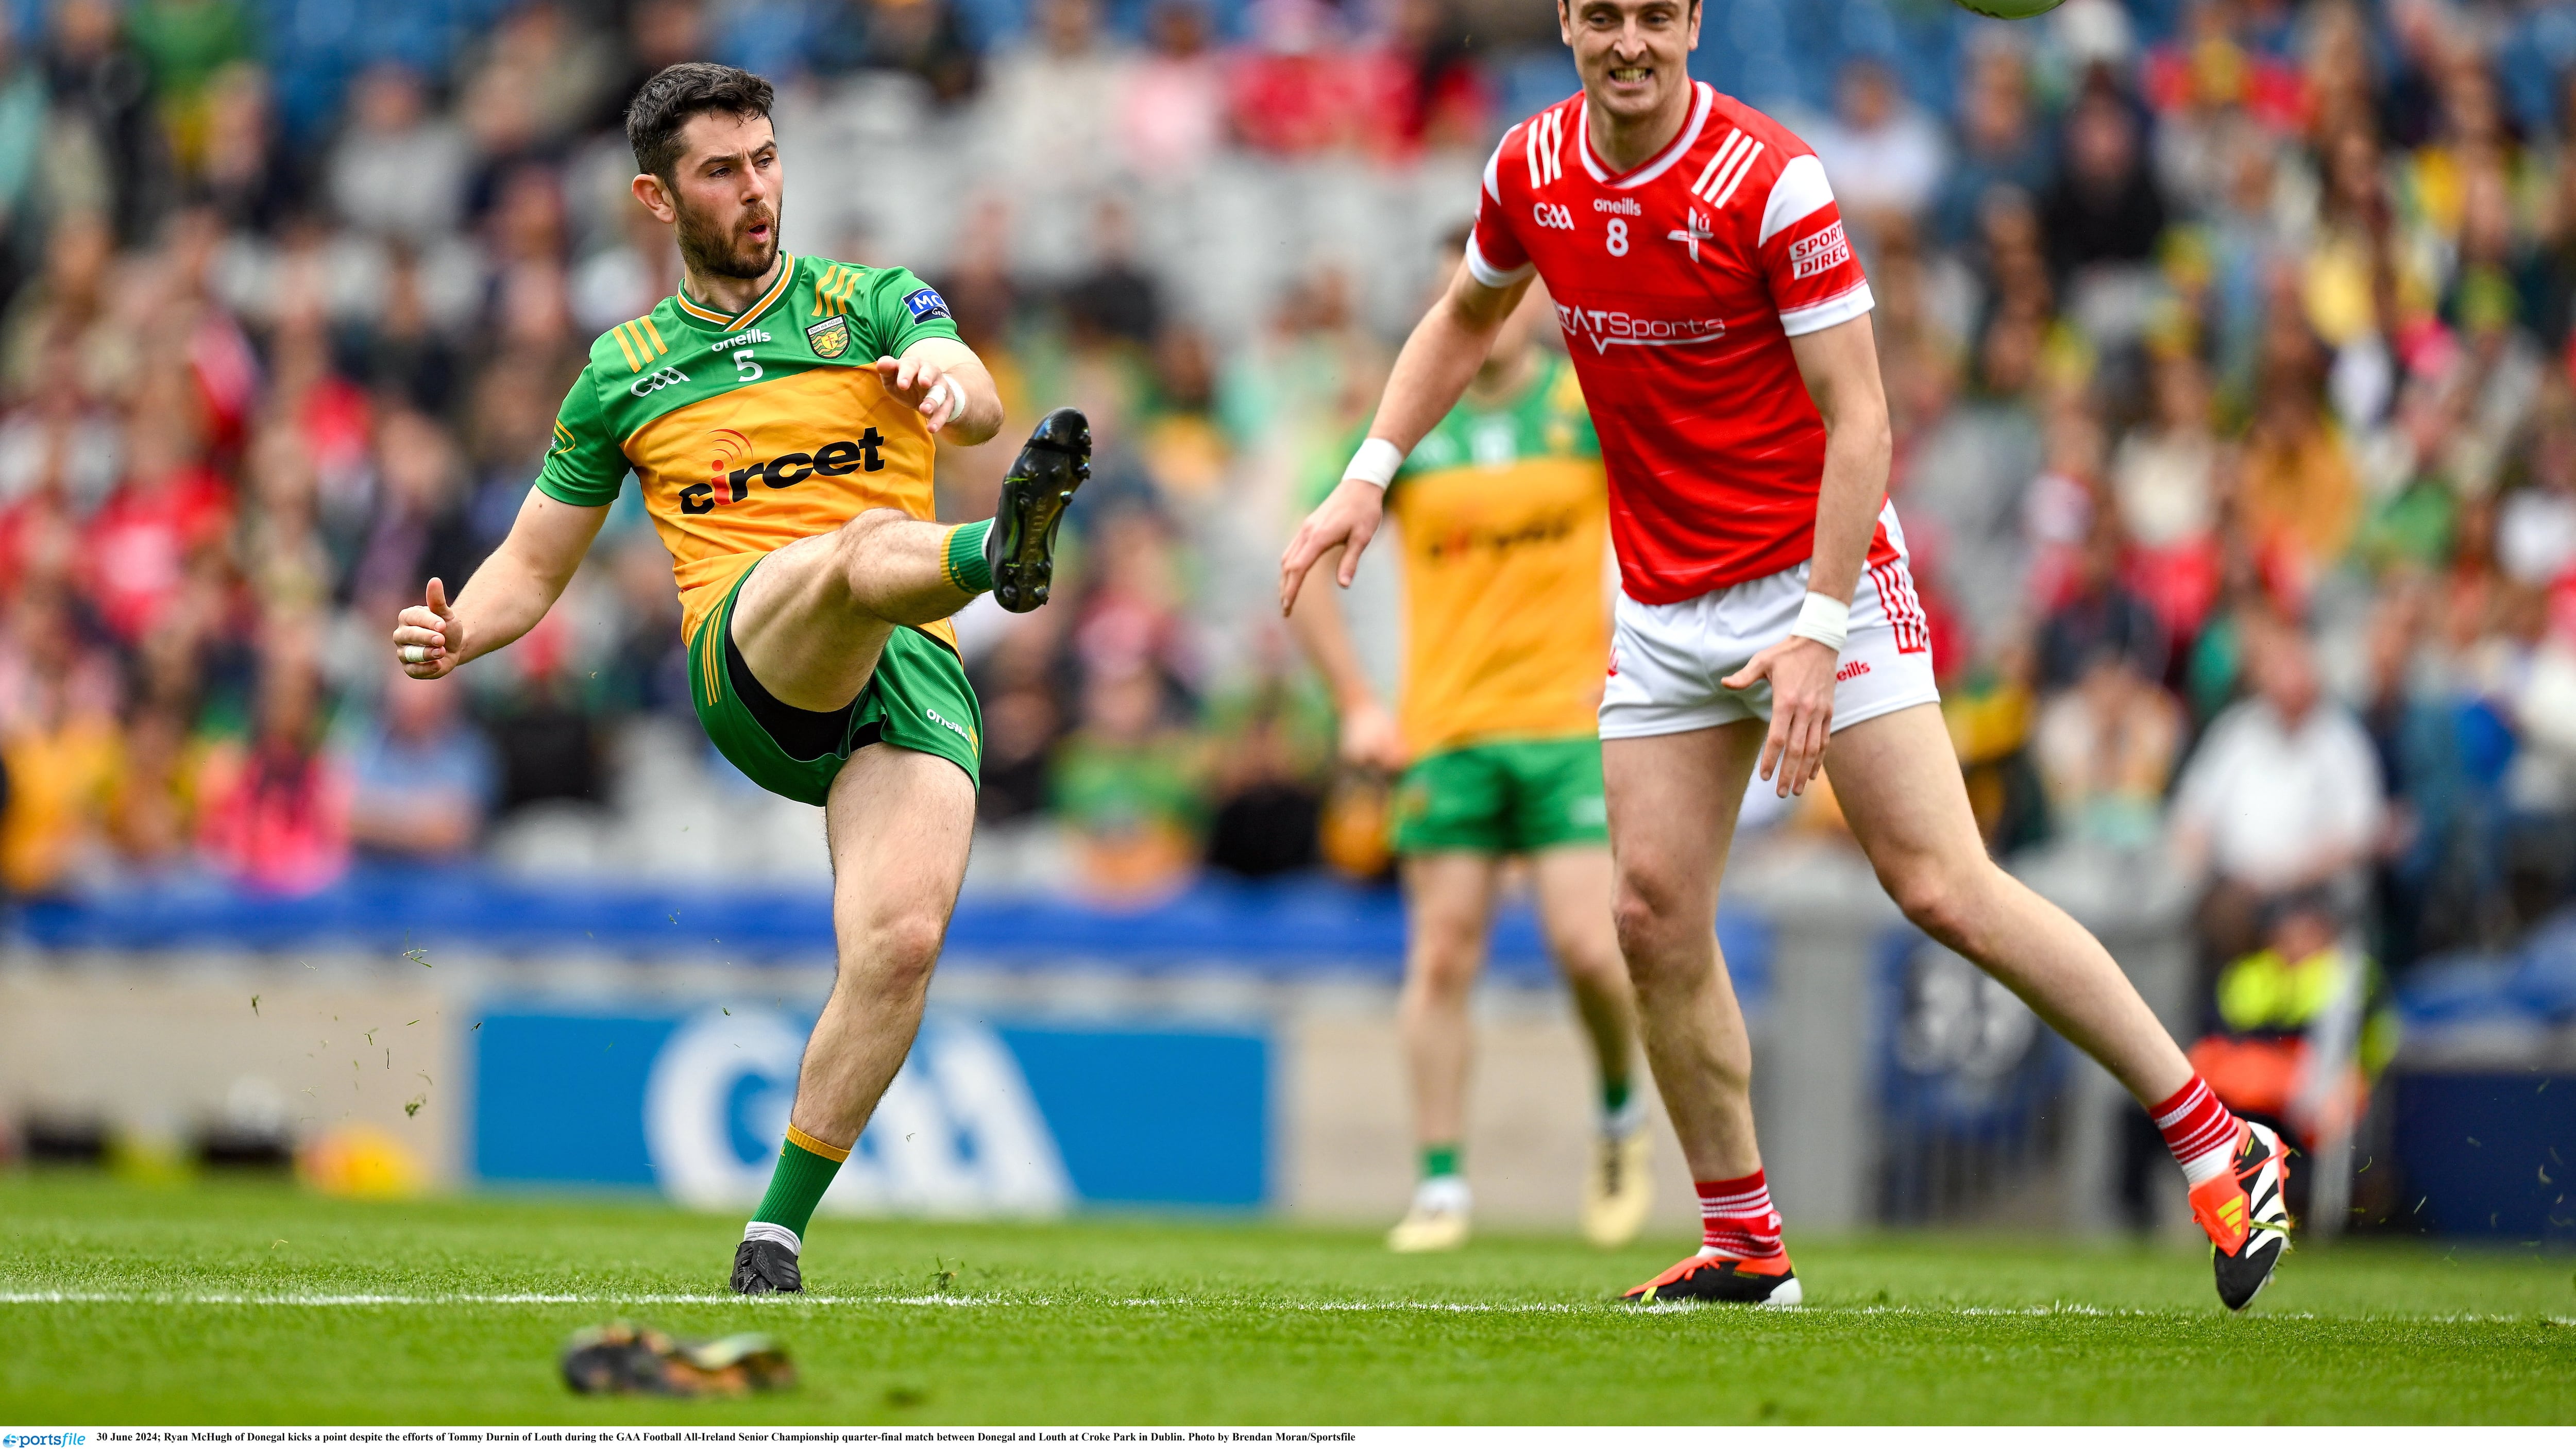 Ryan McHugh of Donegal kicks a point despite the efforts of Tommy Durnin of Louth.